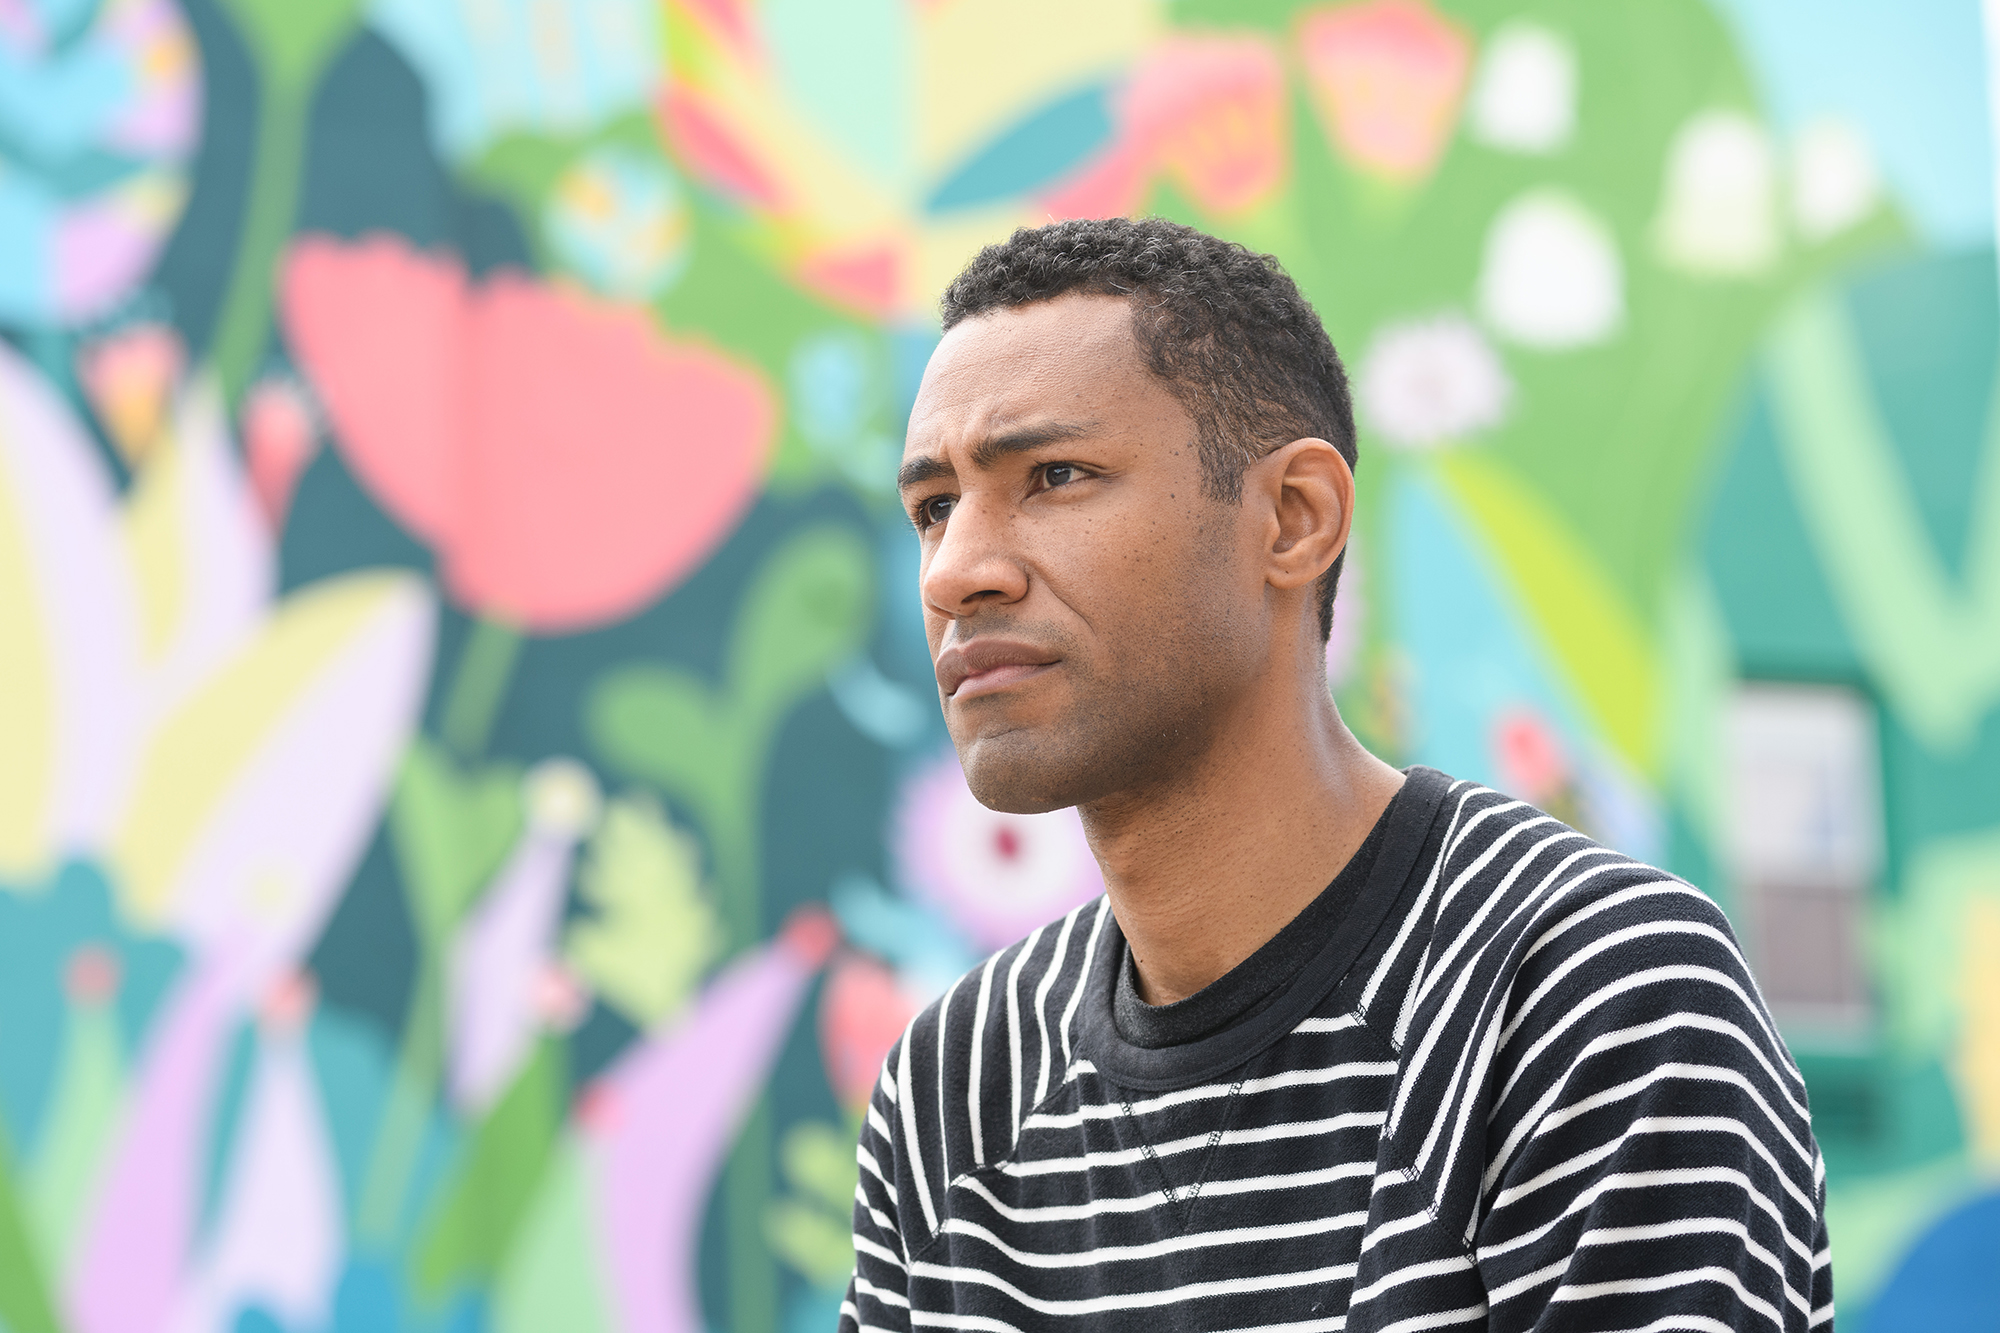 Headshot of a person of medium dark skin tone with short curly black hair, wearing a black and white striped shirt, and sitting in front of a vibrant flower mural.